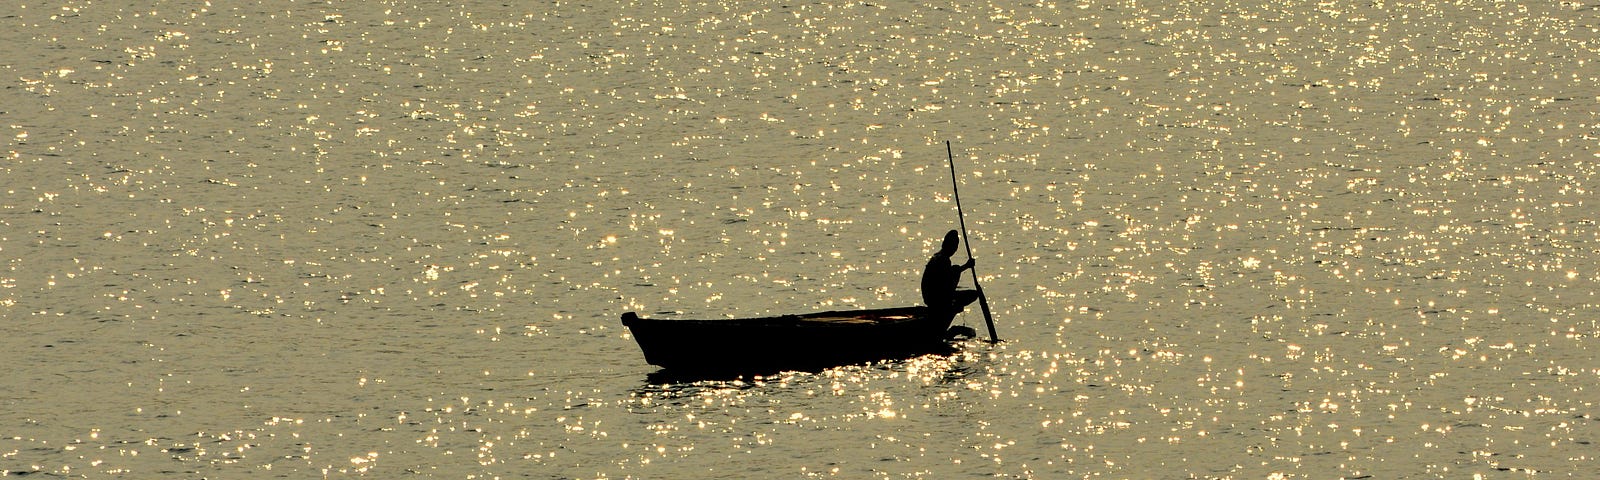 A person in a boat, silhouetted against a golden glittering ocean